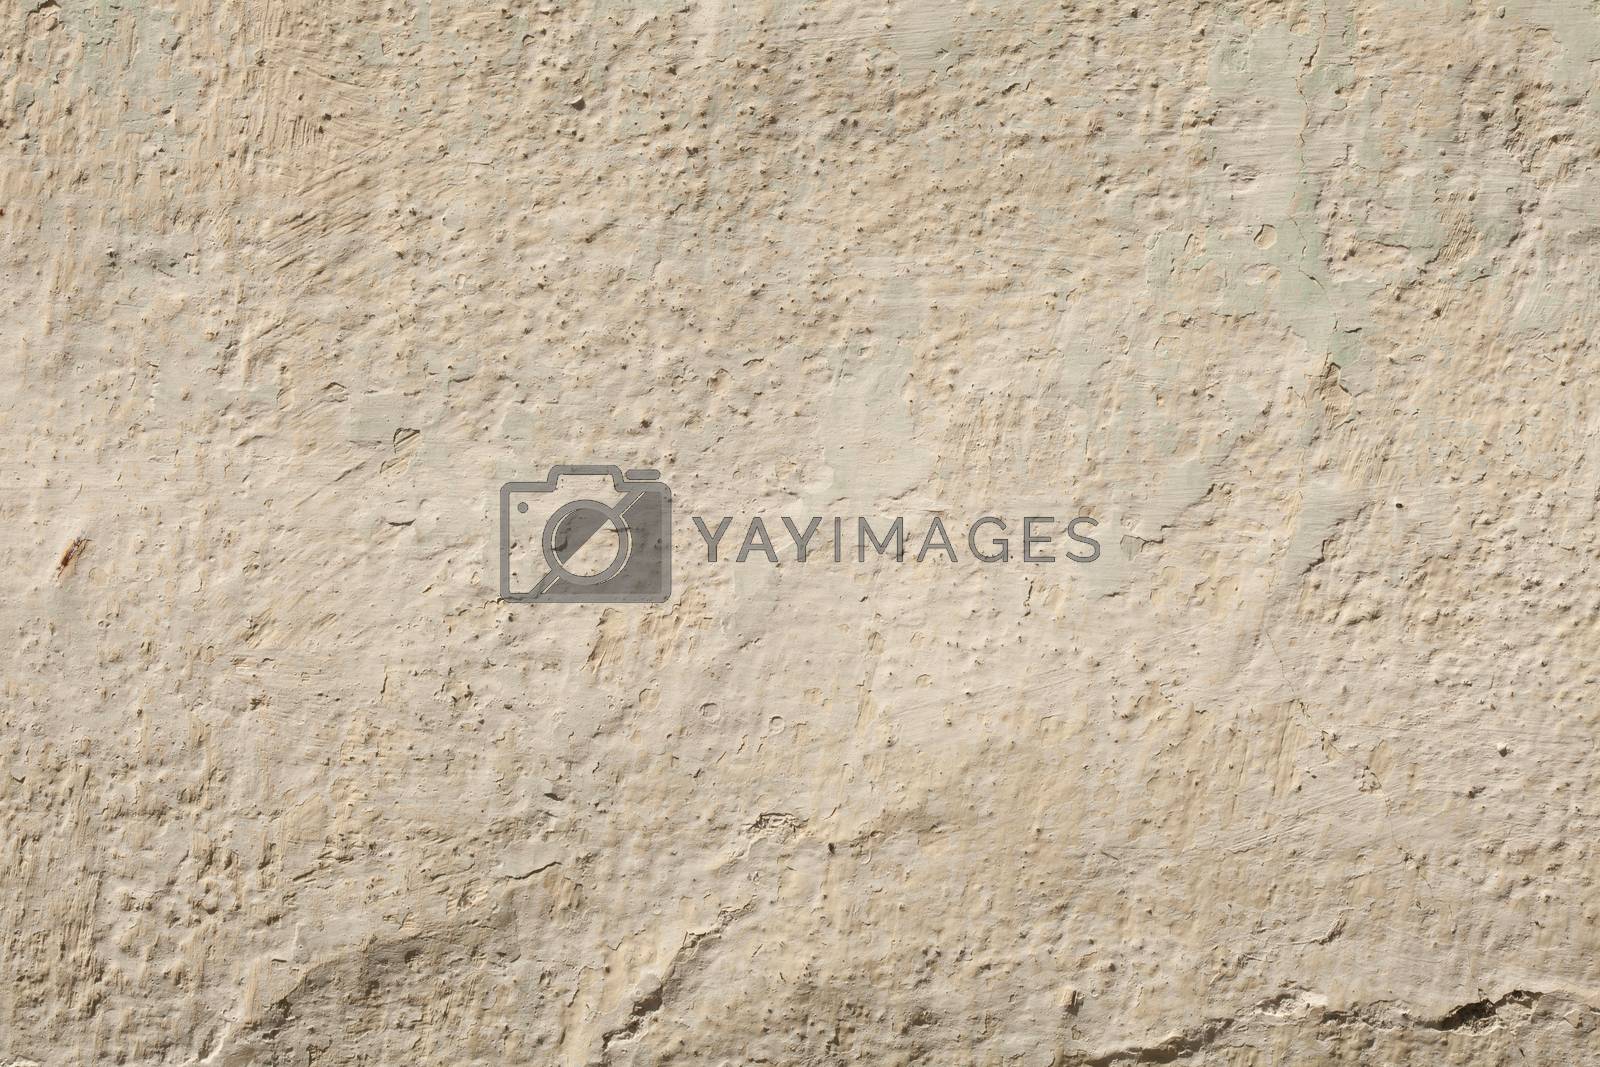 Royalty free image of Old painted surface by Supertooper